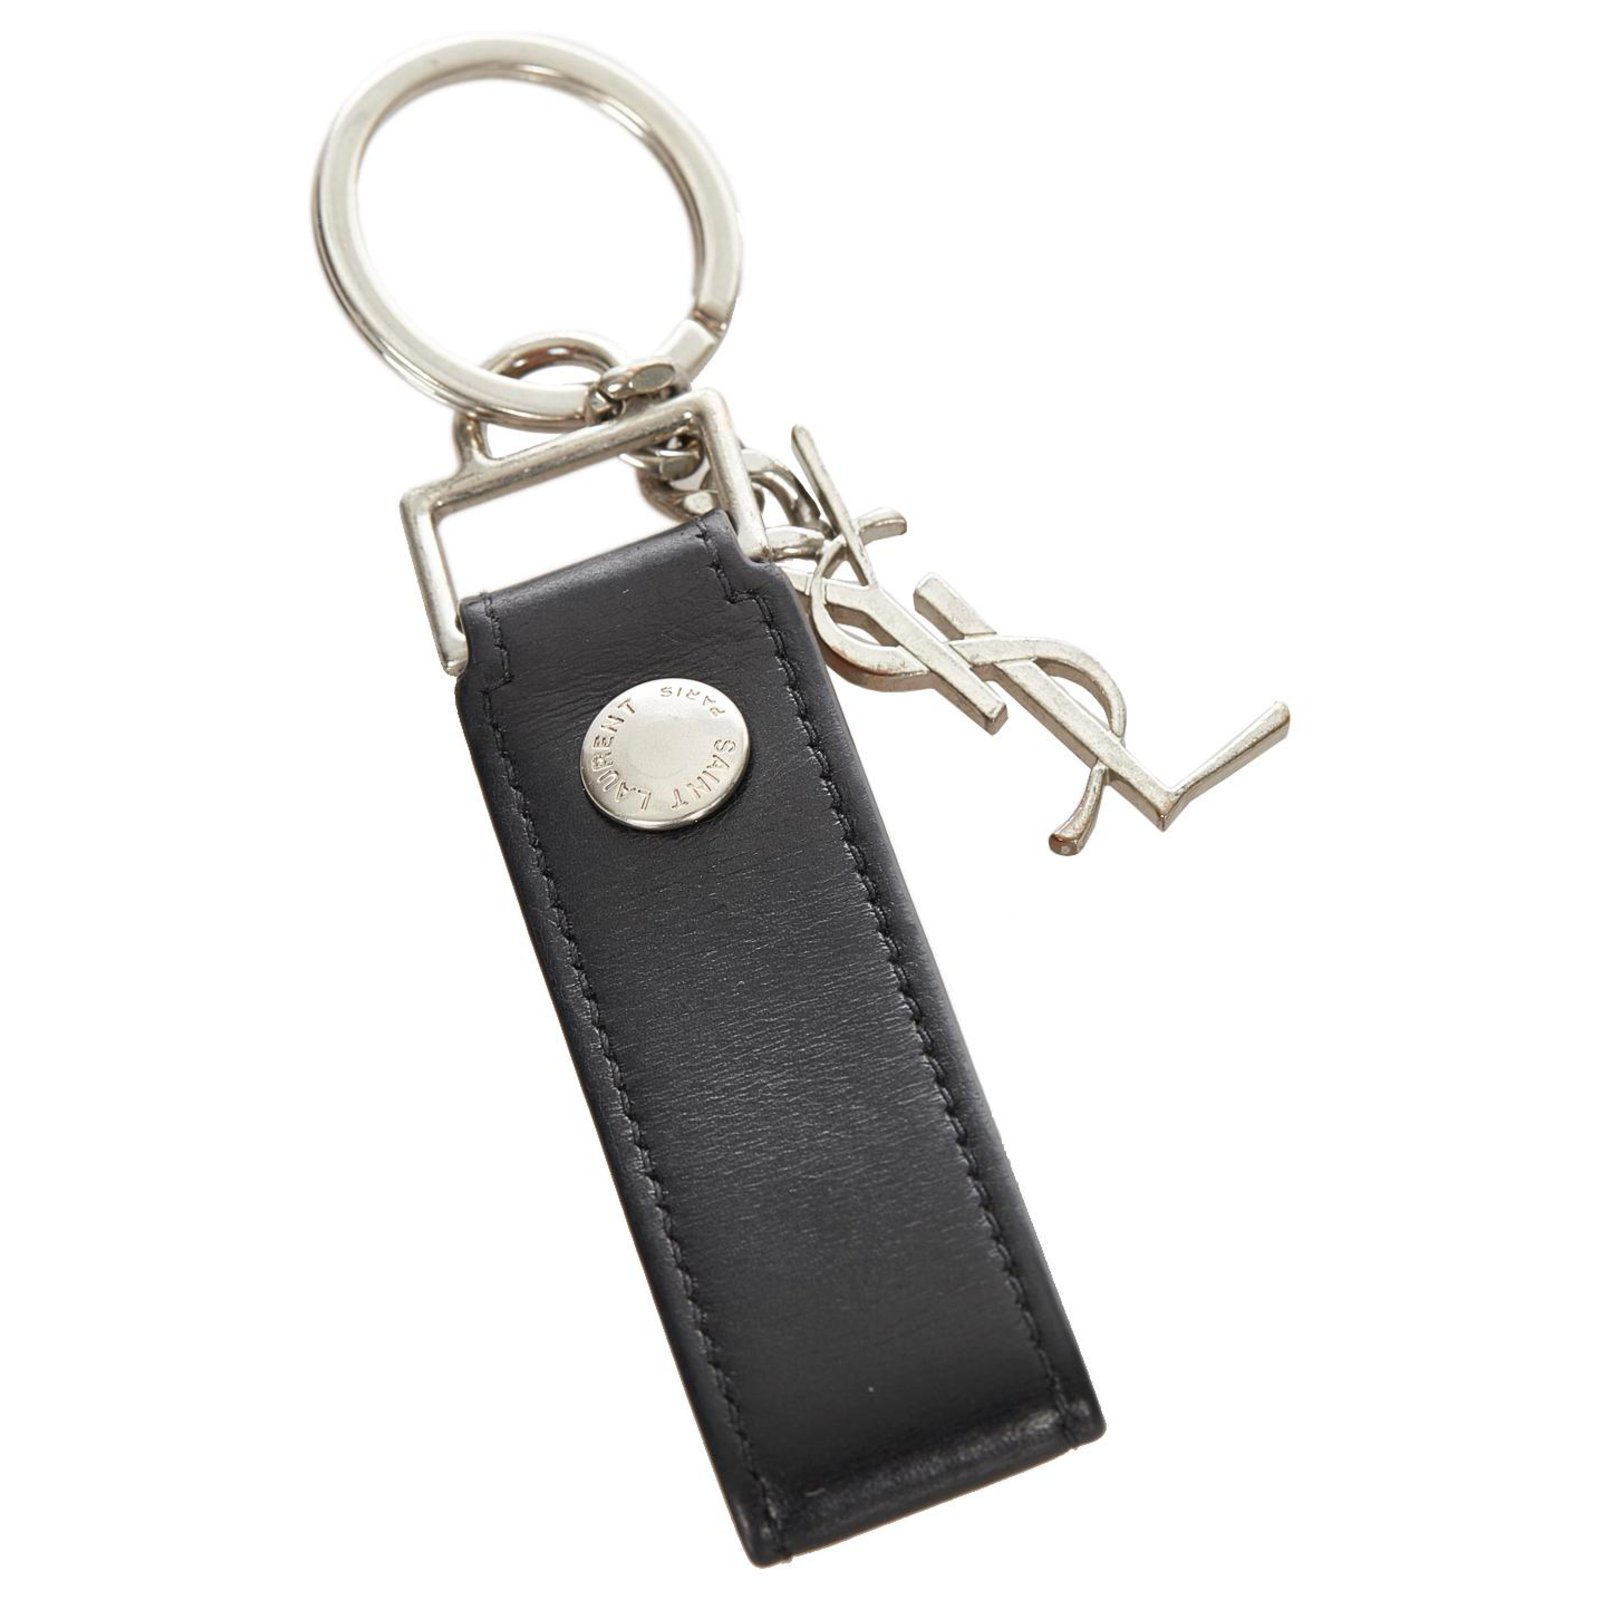 Authenticated Used Yves Saint Laurent SAINT LAURENT PARIS Saint Laurent  Yves YSL key ring chain 518323 2021 autumn / winter new leather black x  silver wallet aq5132 